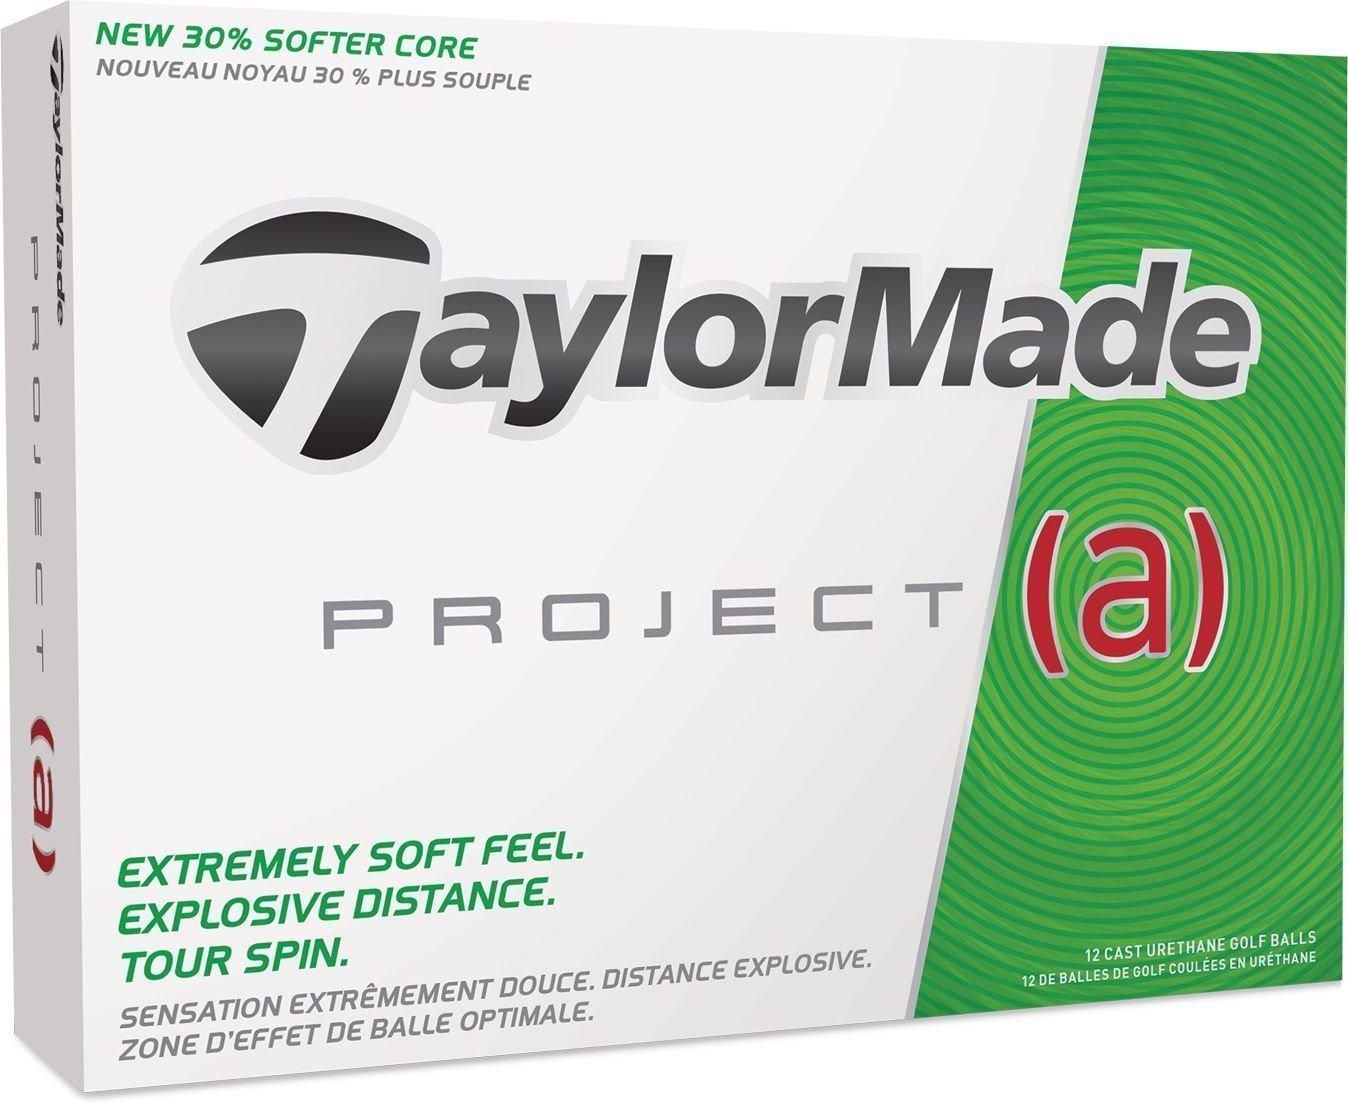 Golflabda TaylorMade Project (a) Ball White